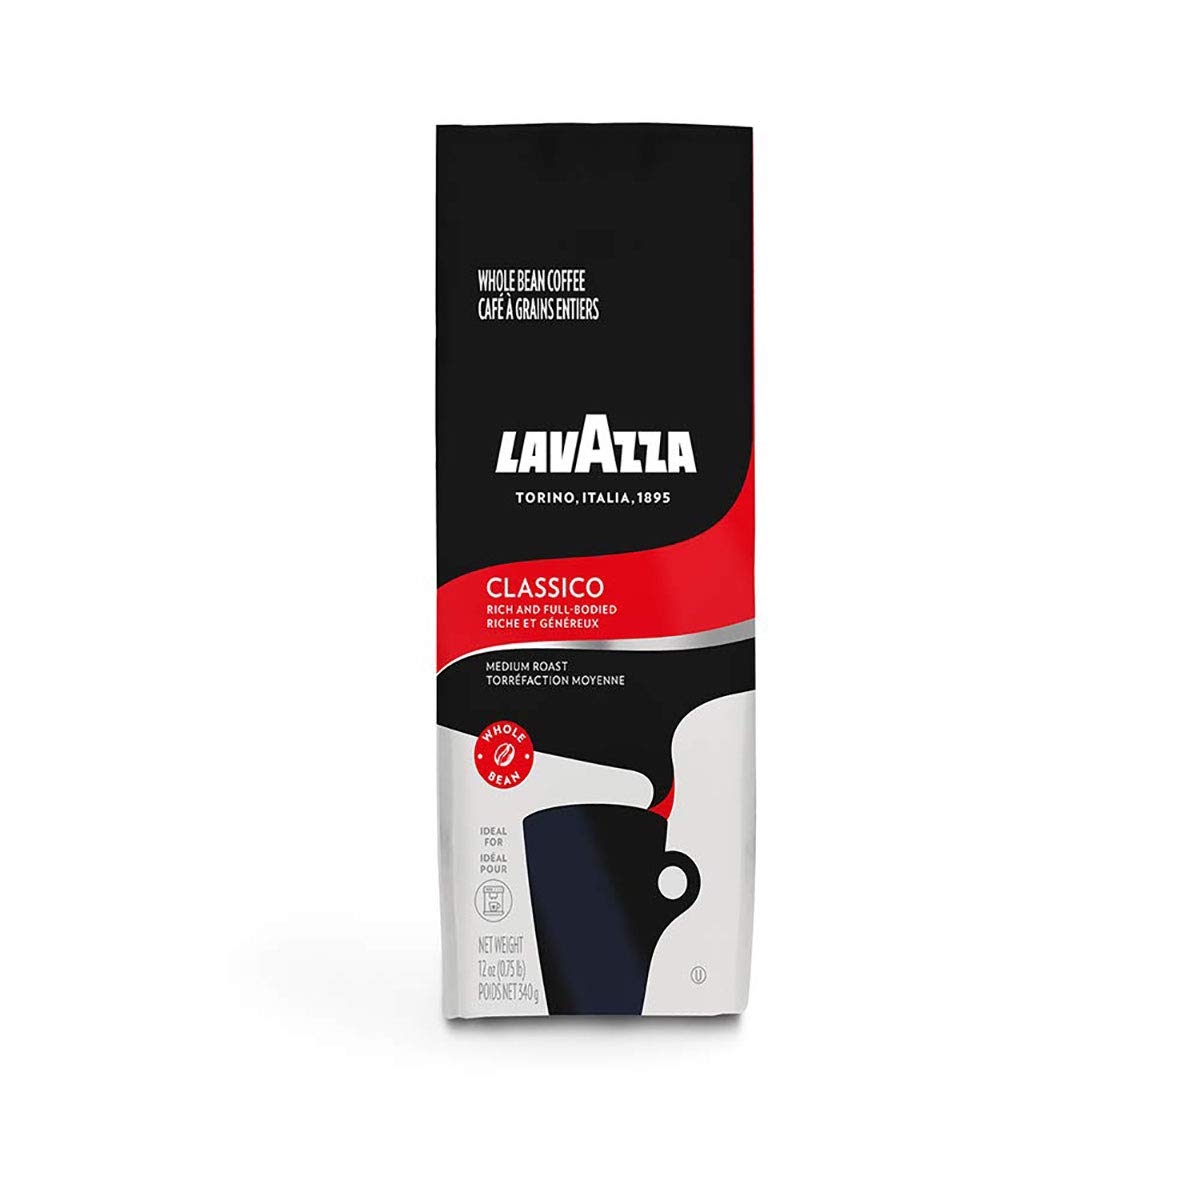 Lavazza Classico Whole Bean Coffee Blend Medium Roast 12oz, Classico, Full-bodied medium roast with rich flavor and notes of dried fruit